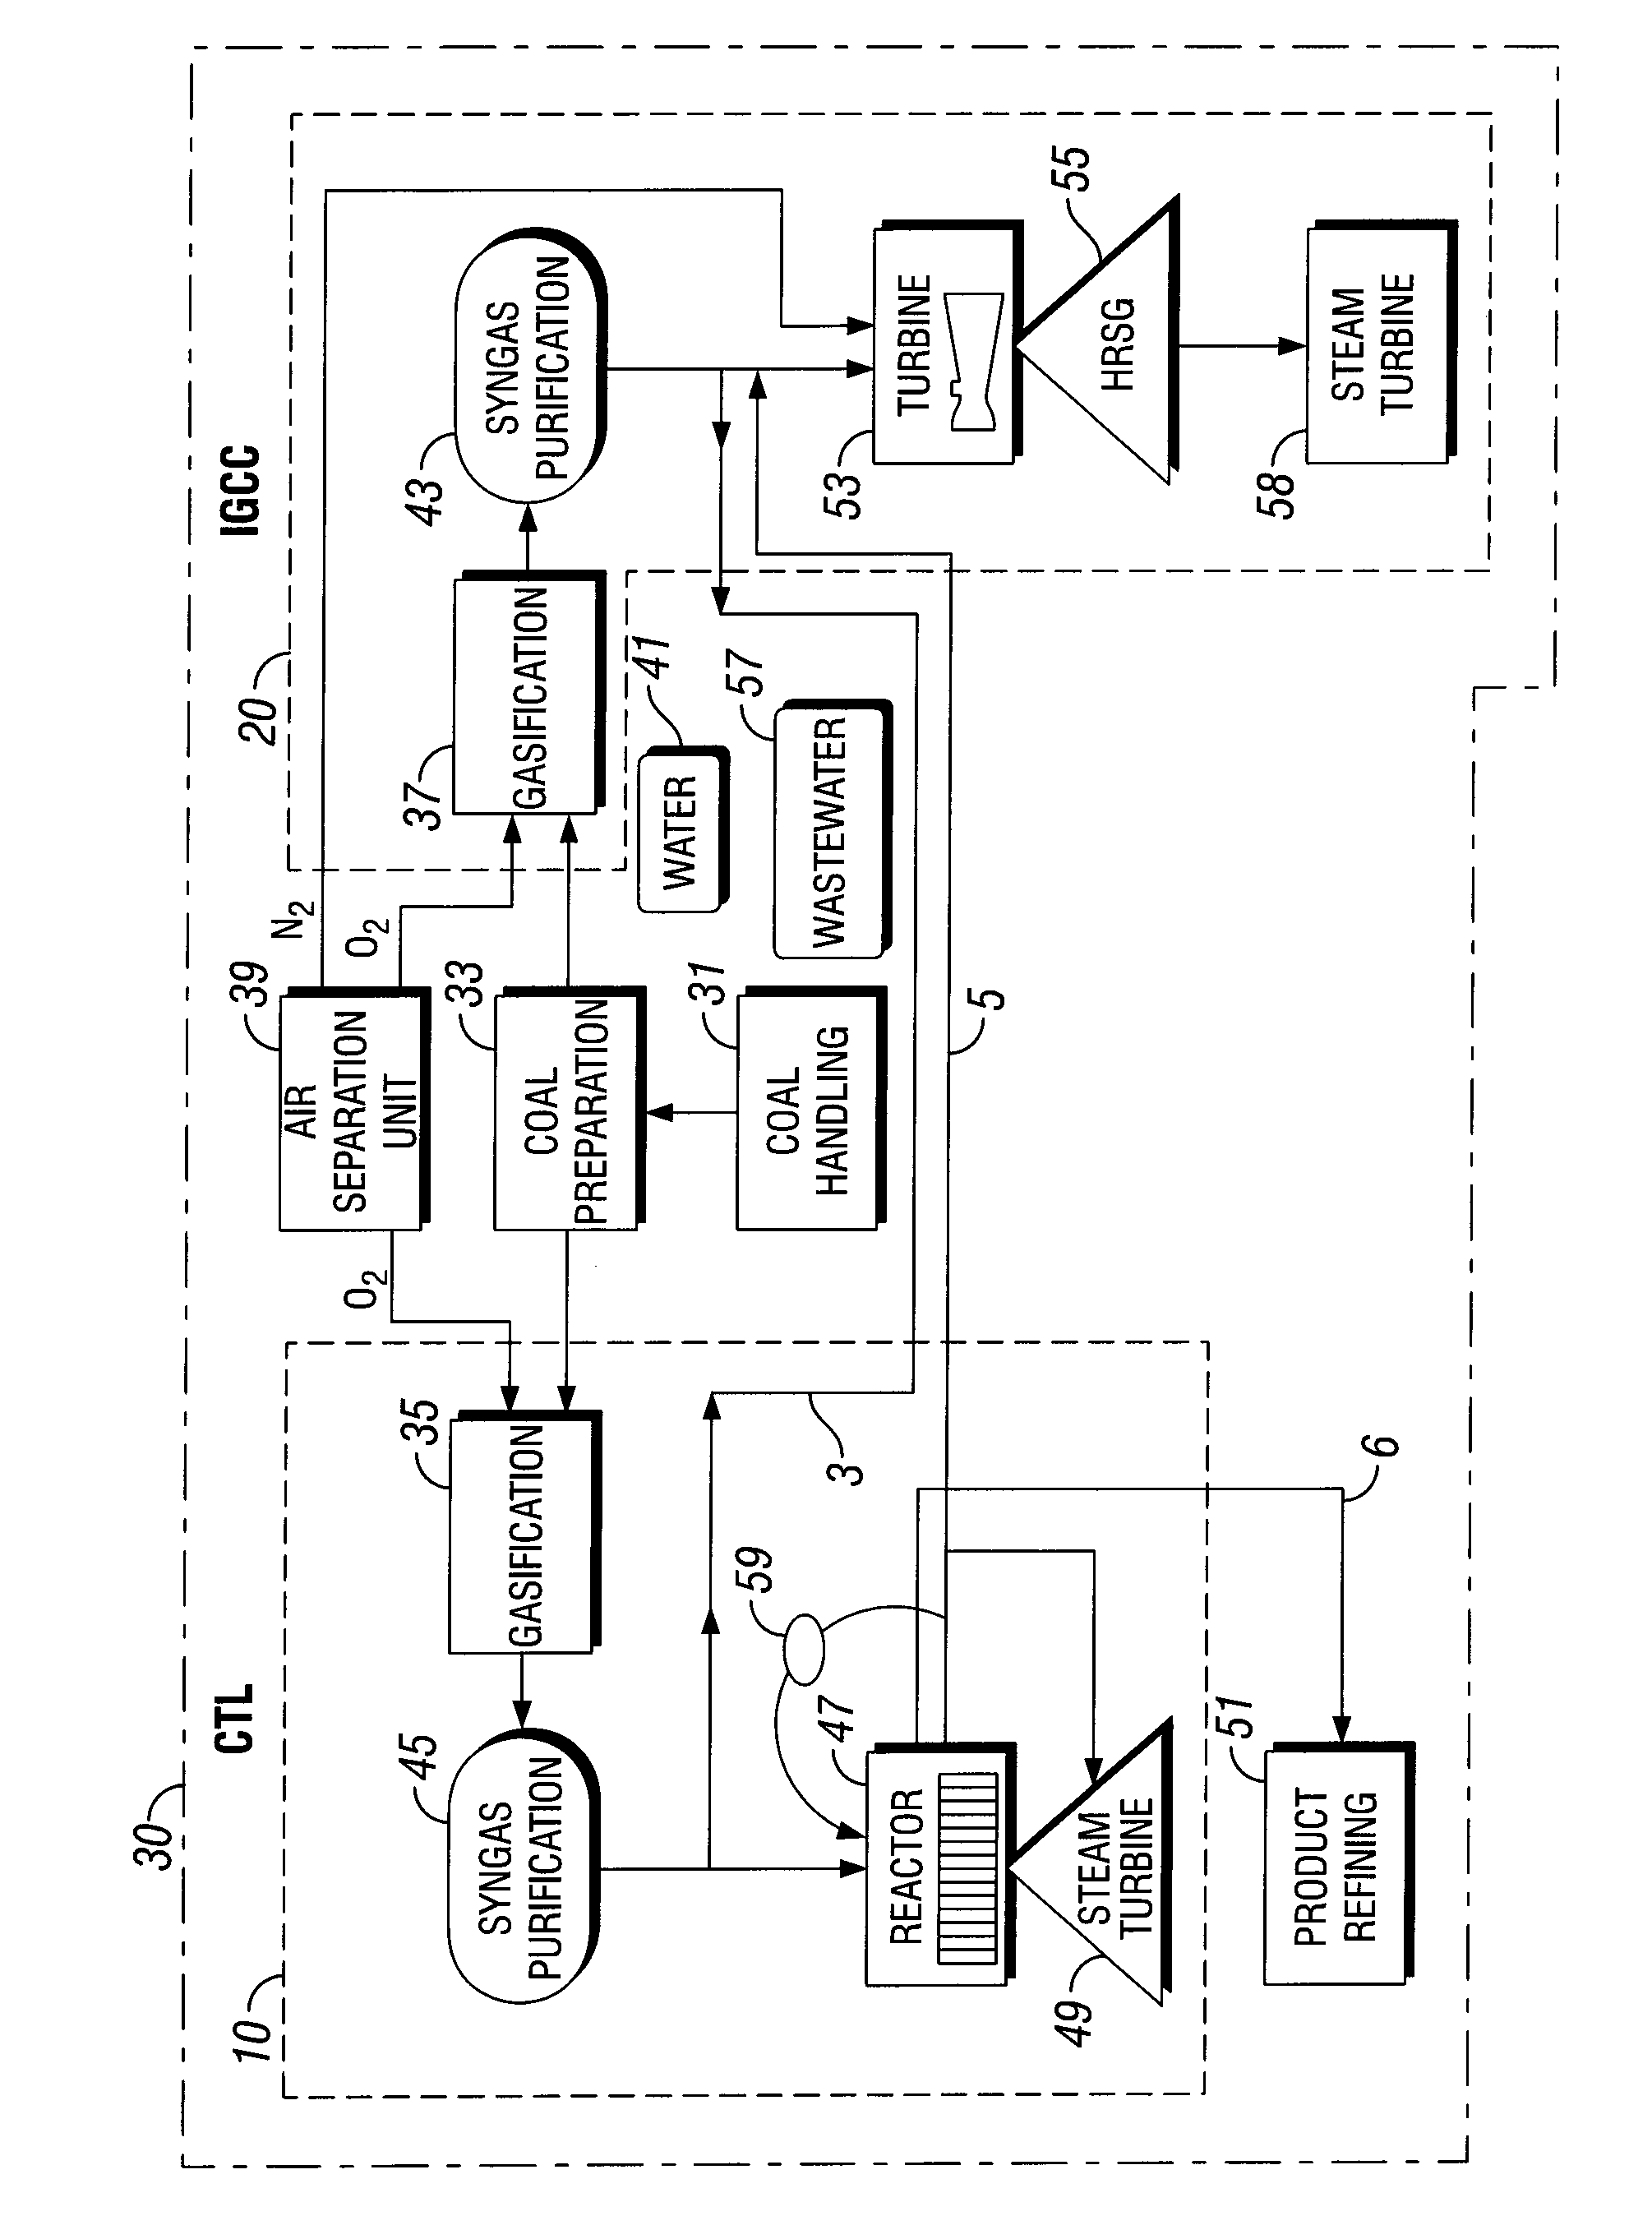 Business integration of integrated gasification combined cycle power plant and coal to liquid fuel plant